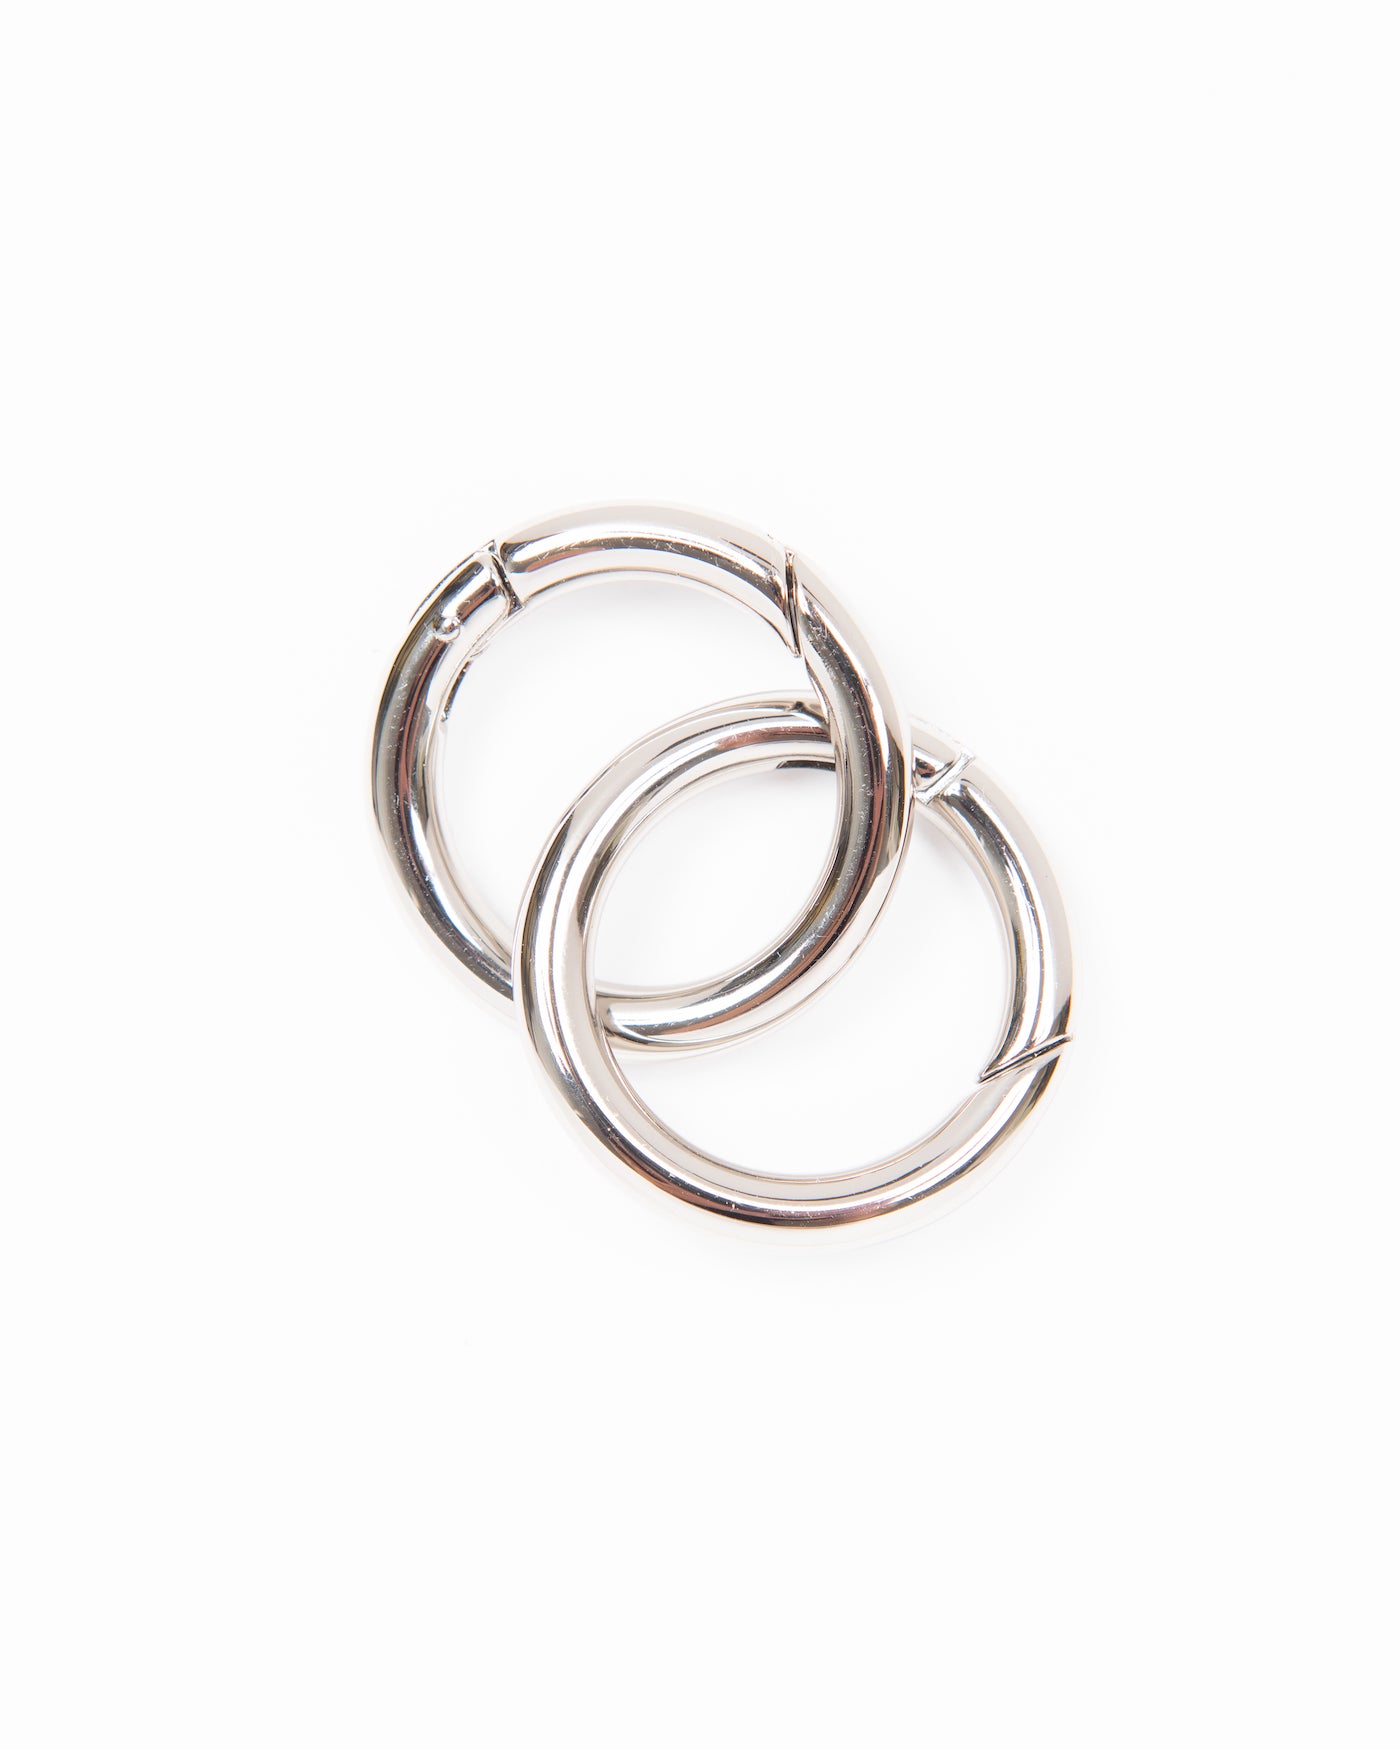 Silver O Rings Small O-rings Buckles Seamed Rings Jewelry Making Jump Ring  for Sewing Straps Purse Rings Strap Rings 50pcs 